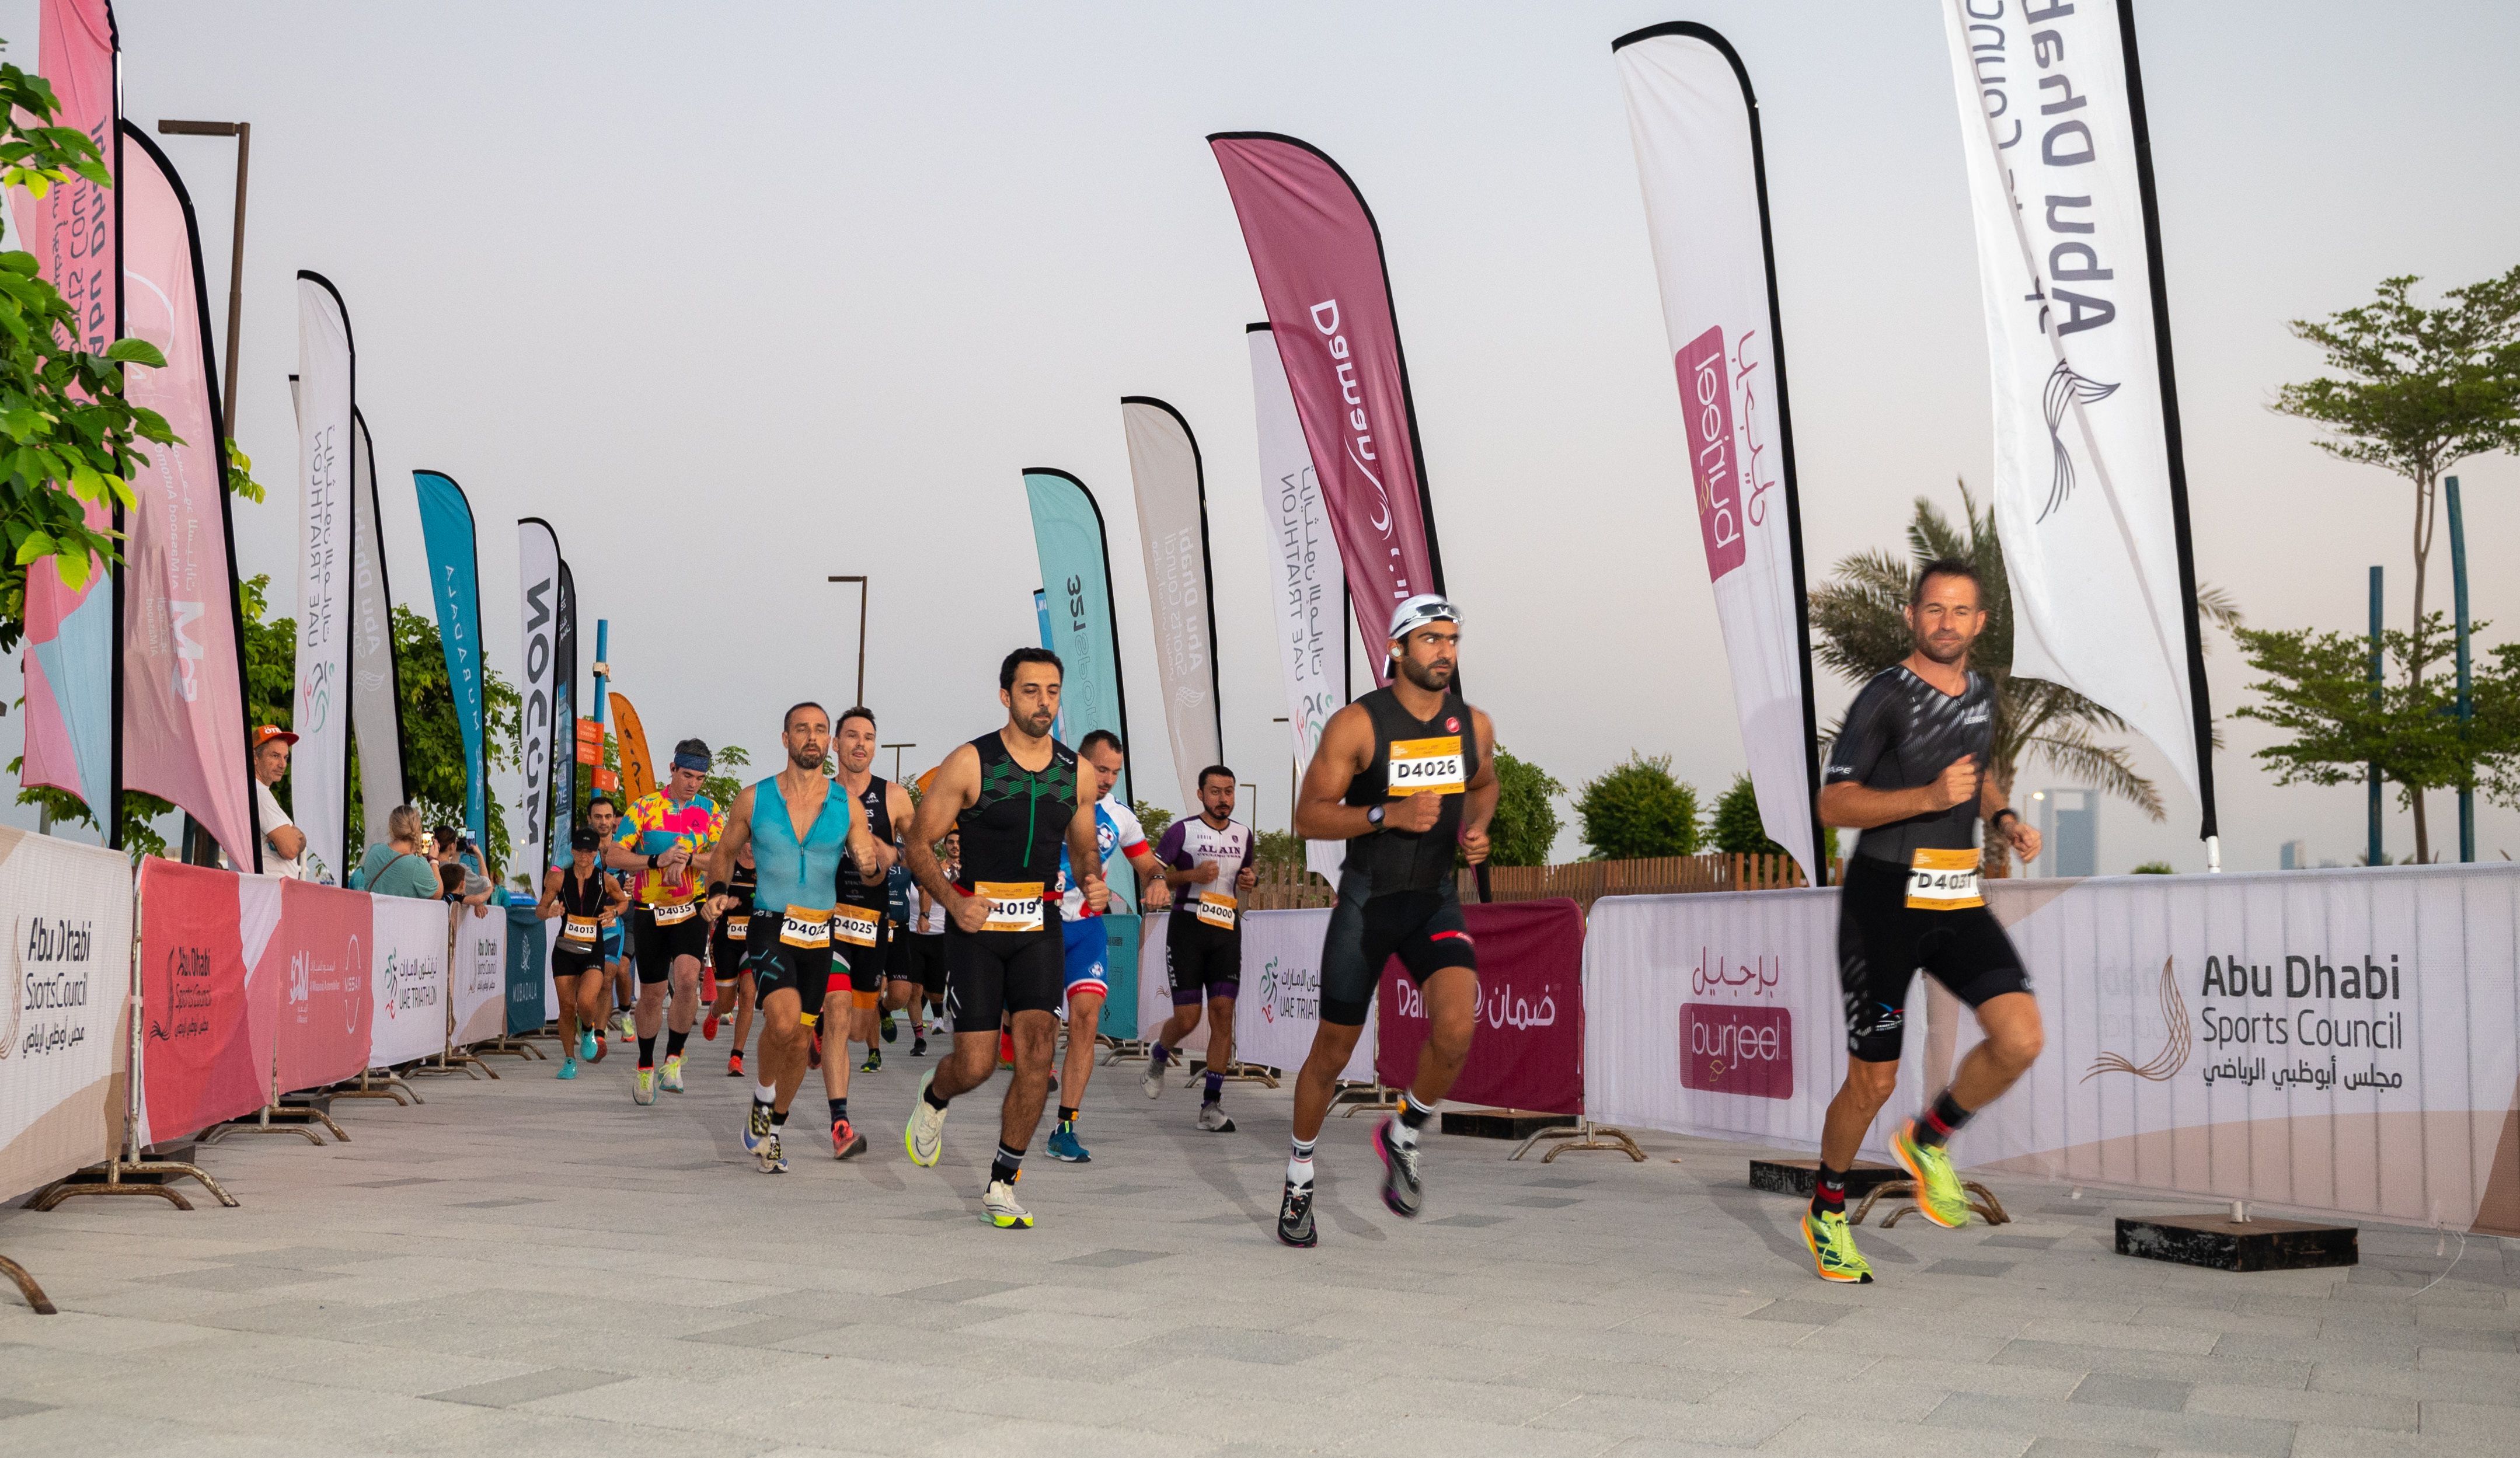 Al Masaood Automobiles-Nissan Promotes Healthy Lifestyle through Year-round Sporting Events in Abu Dhabi